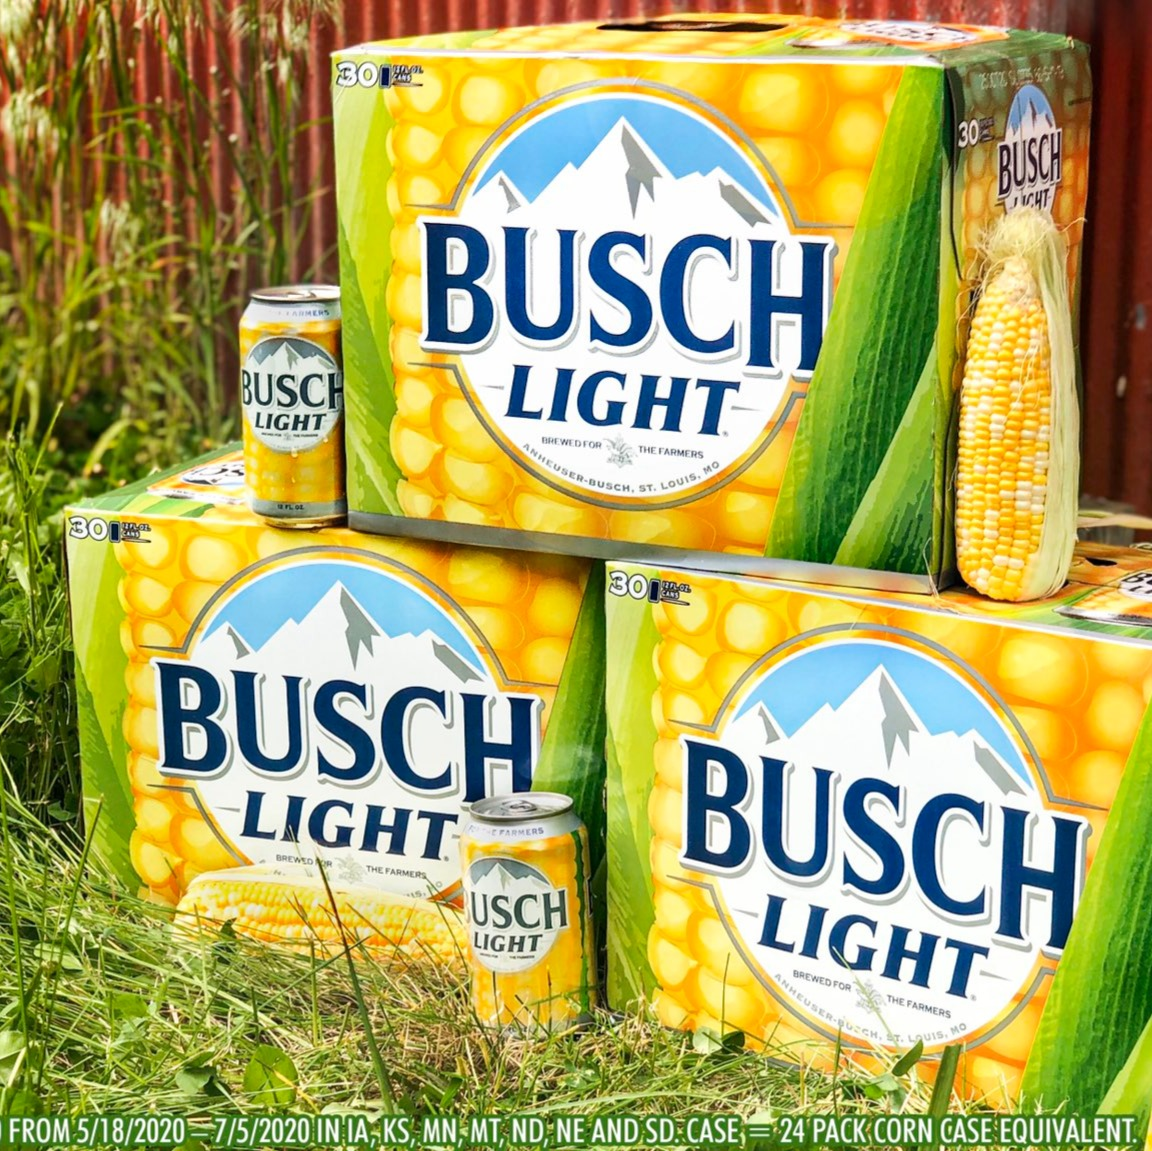 Drink Busch Light and Help the Farmers